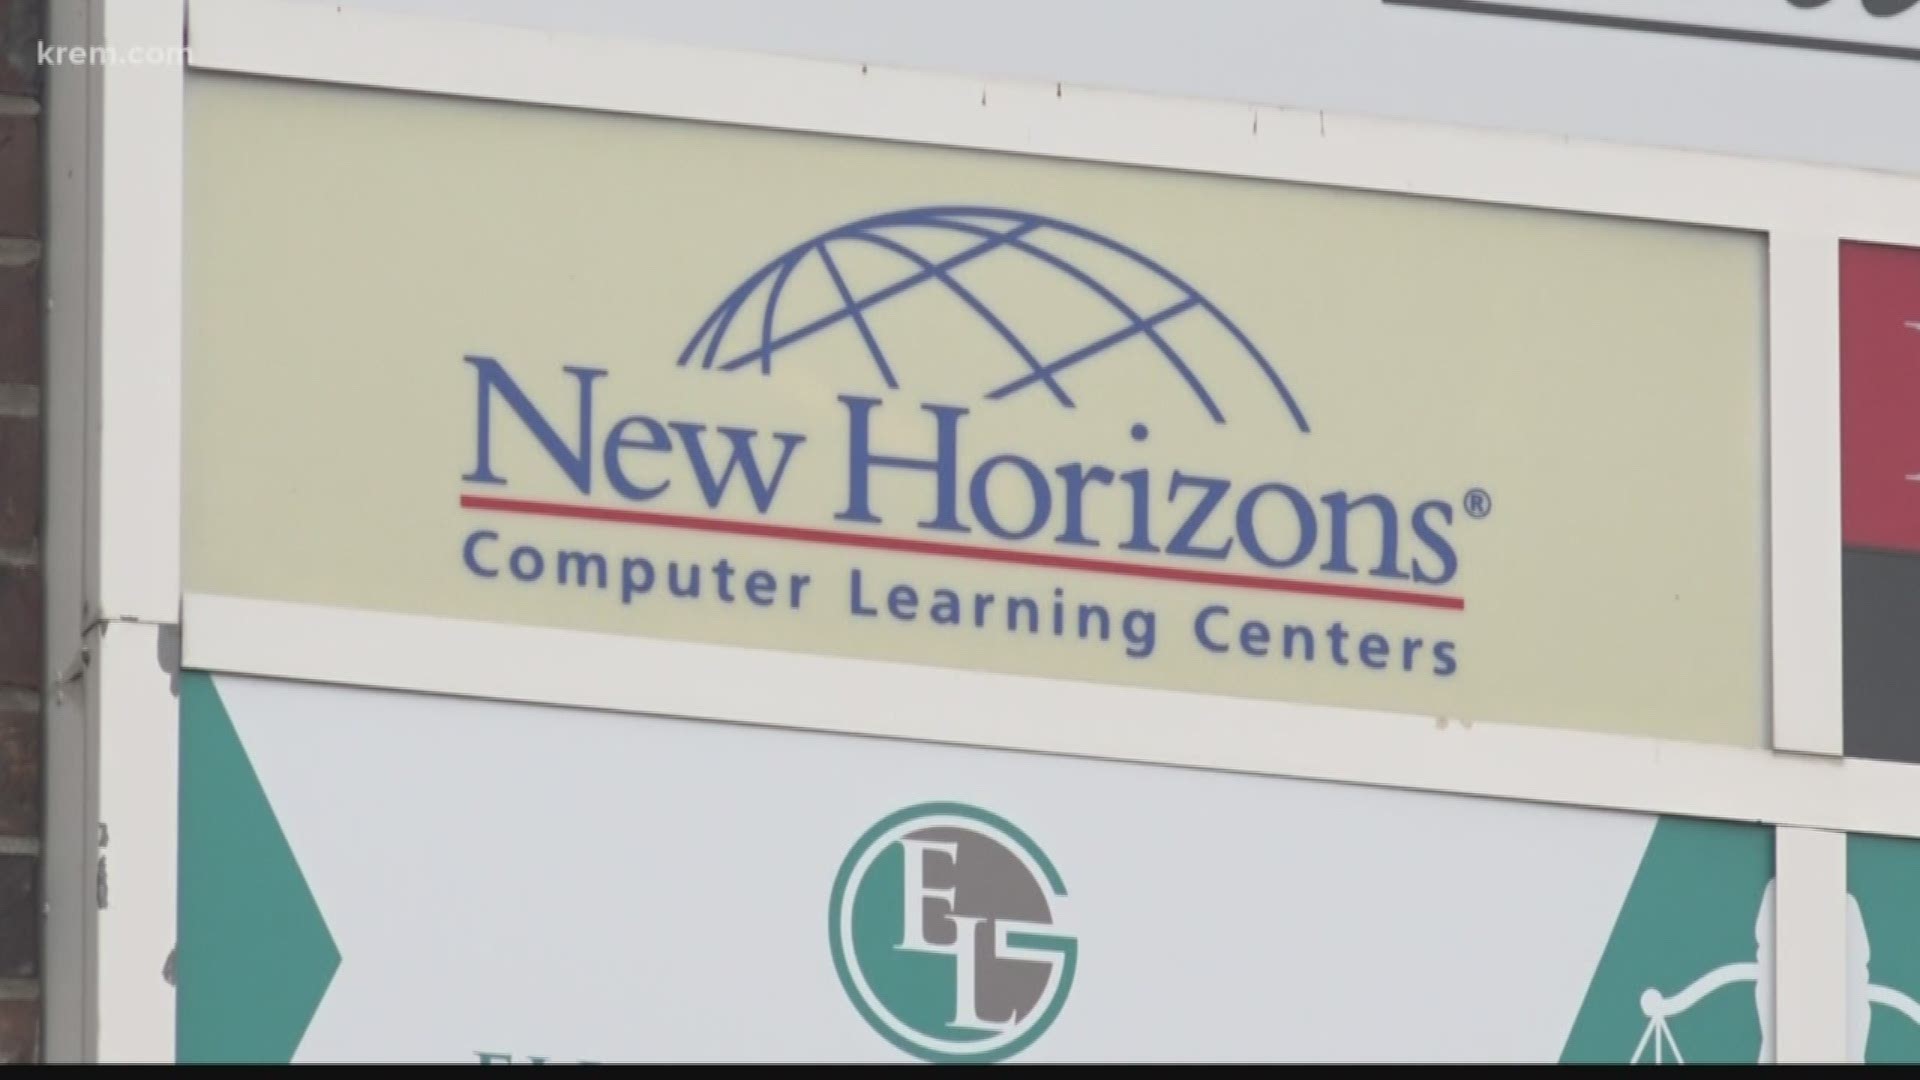 New Horizons Spokane and its General Manager Spirit Dorris admitted that they failed to comply with certain VA requirements.